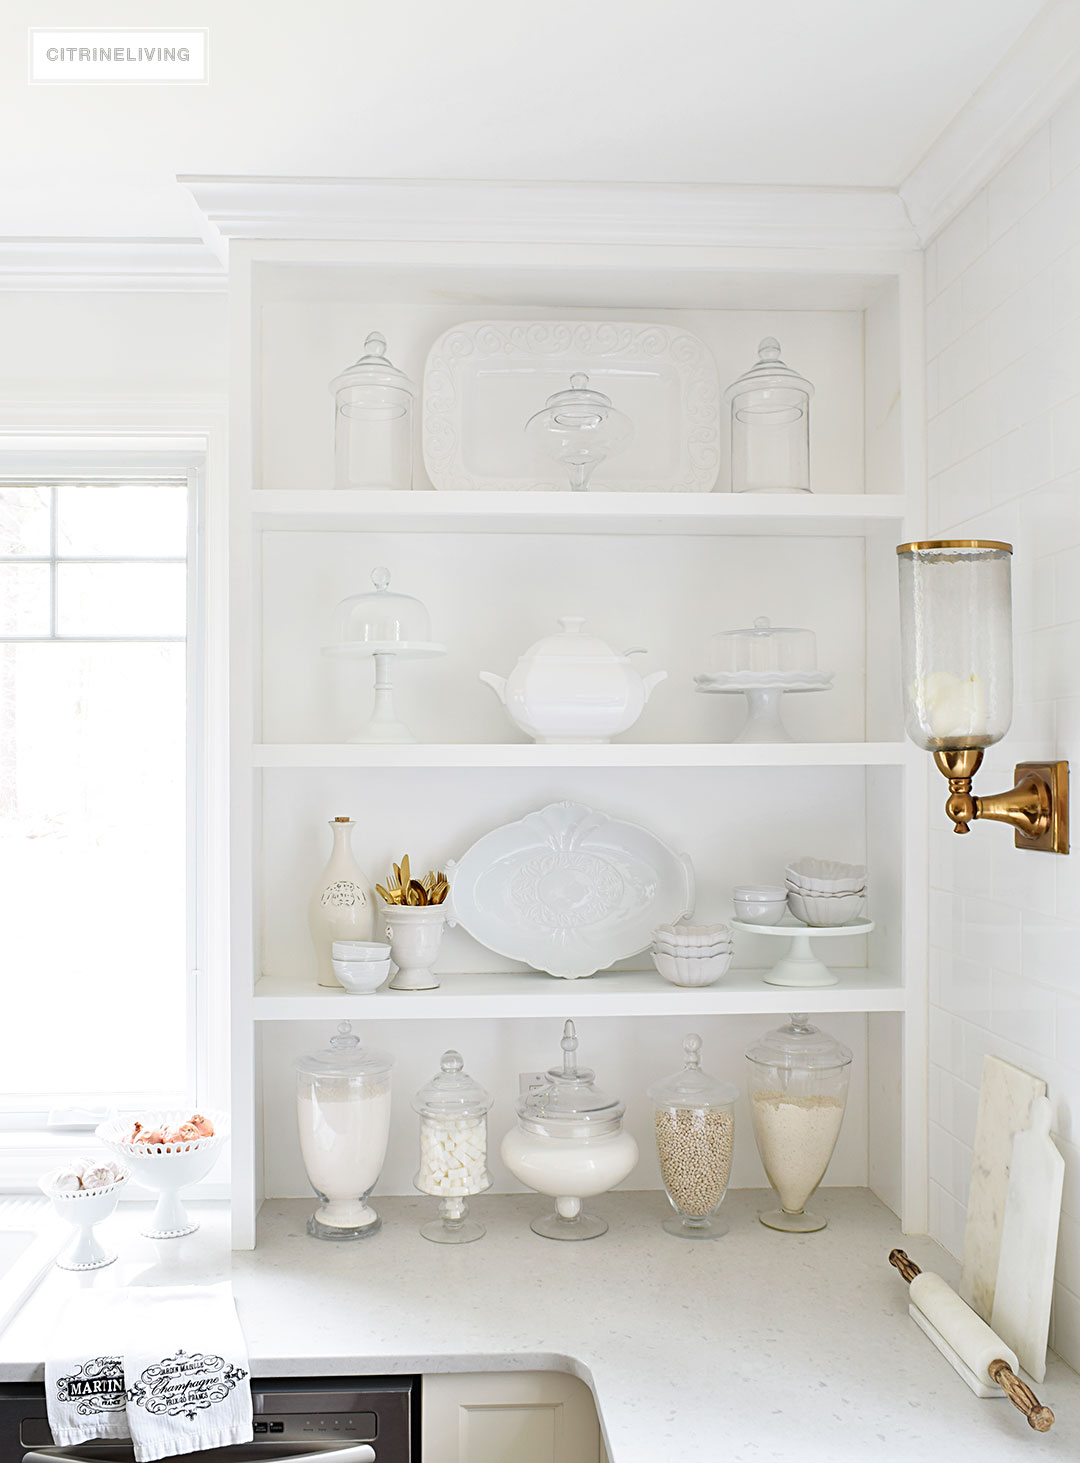 Bring vintage flair to your open kitchen shelving with a mix of white and cream serving pieces and dishware for a fresh, layered look.